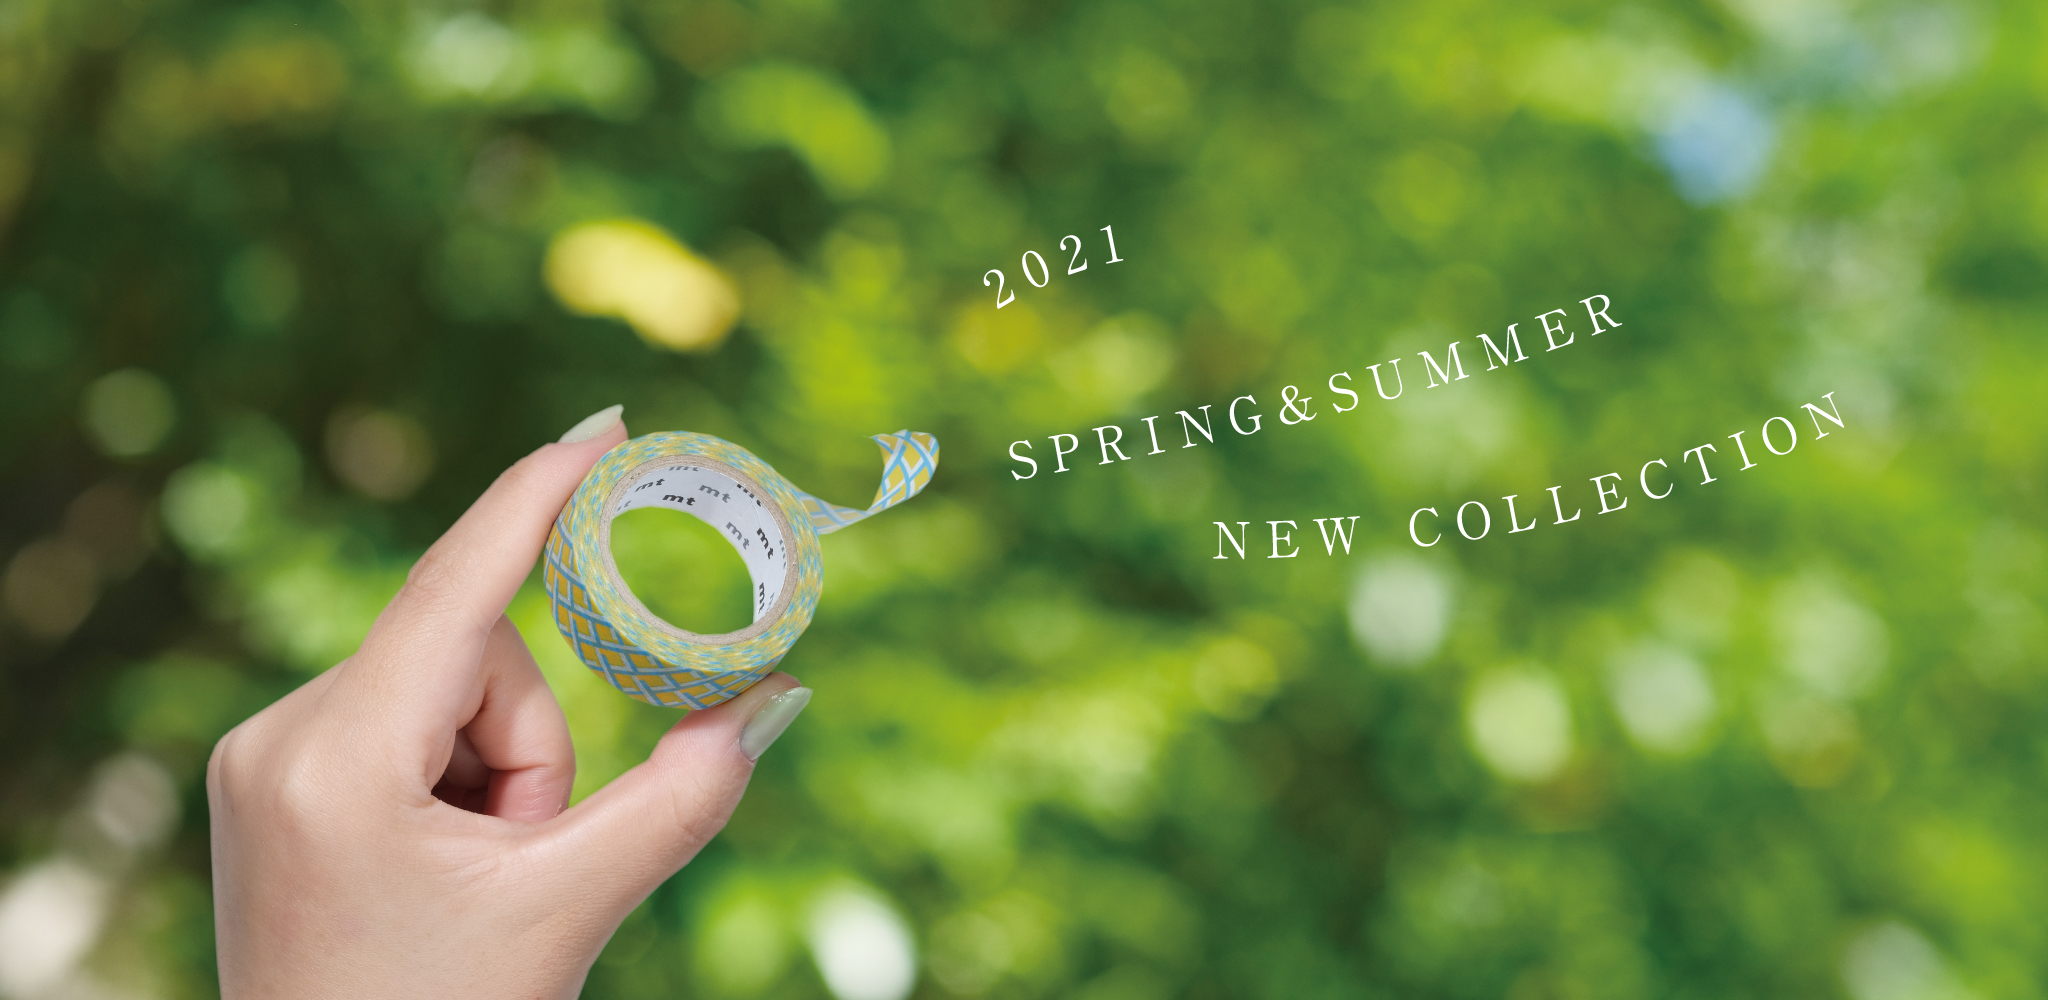 2021 SPRING&SUMMER NEW COLLECTION